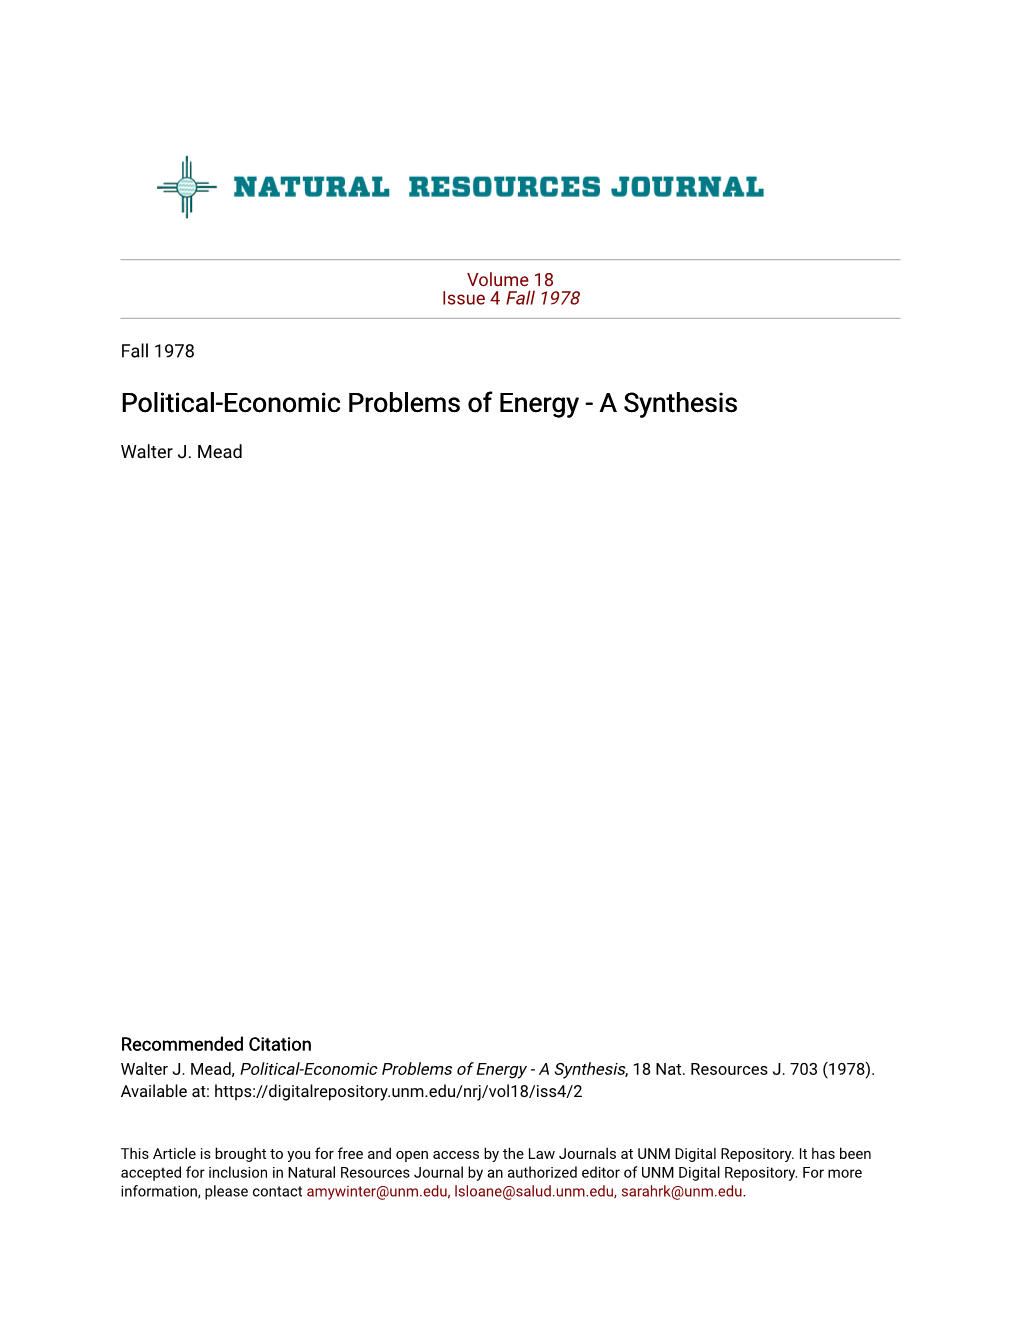 Political-Economic Problems of Energy - a Synthesis